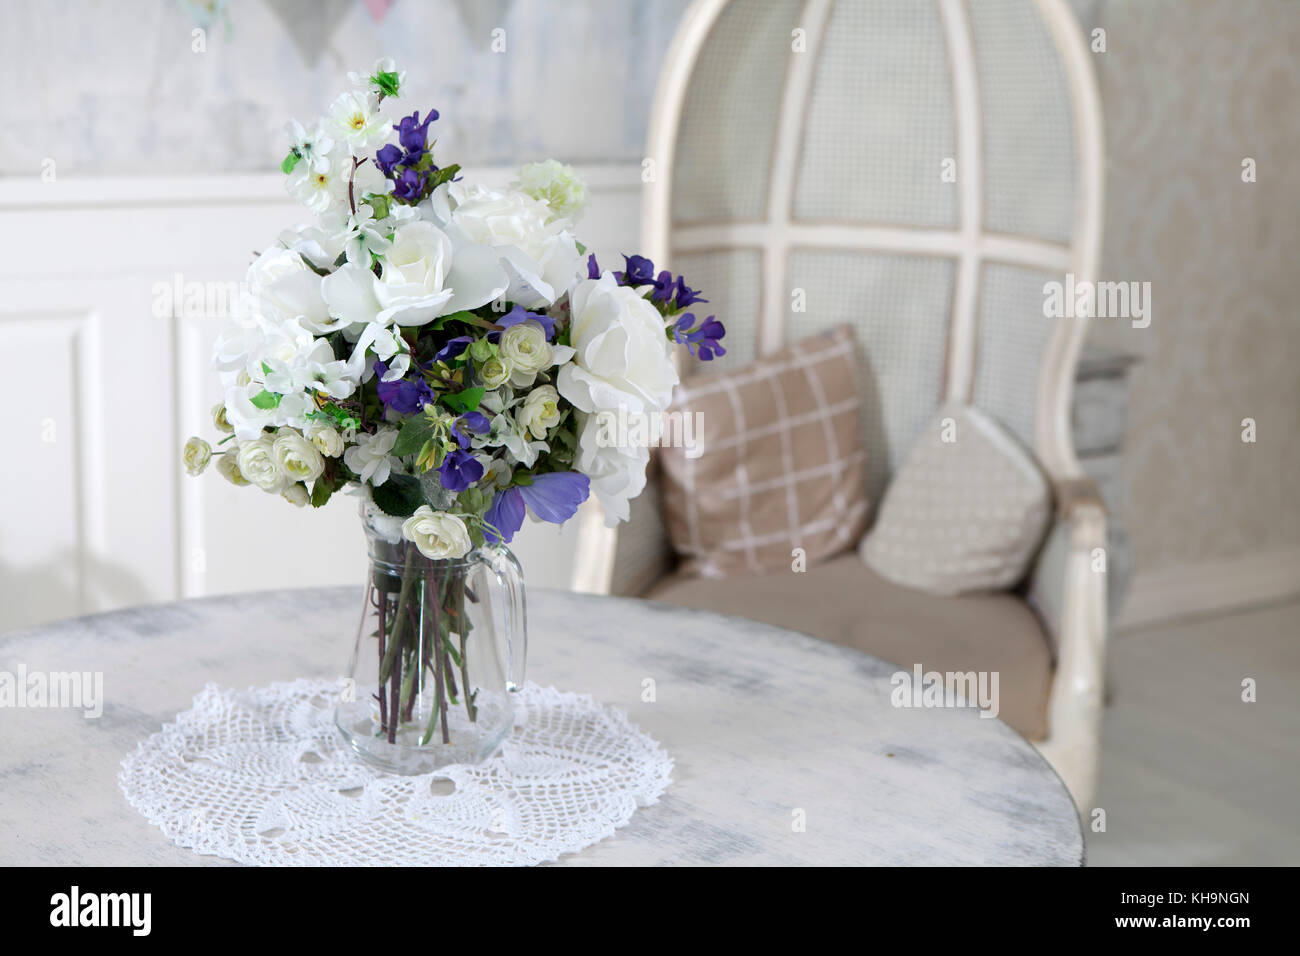 Bouquet of artificial roses, phlox and bells on a table in a vase, as an interior decoration Stock Photo